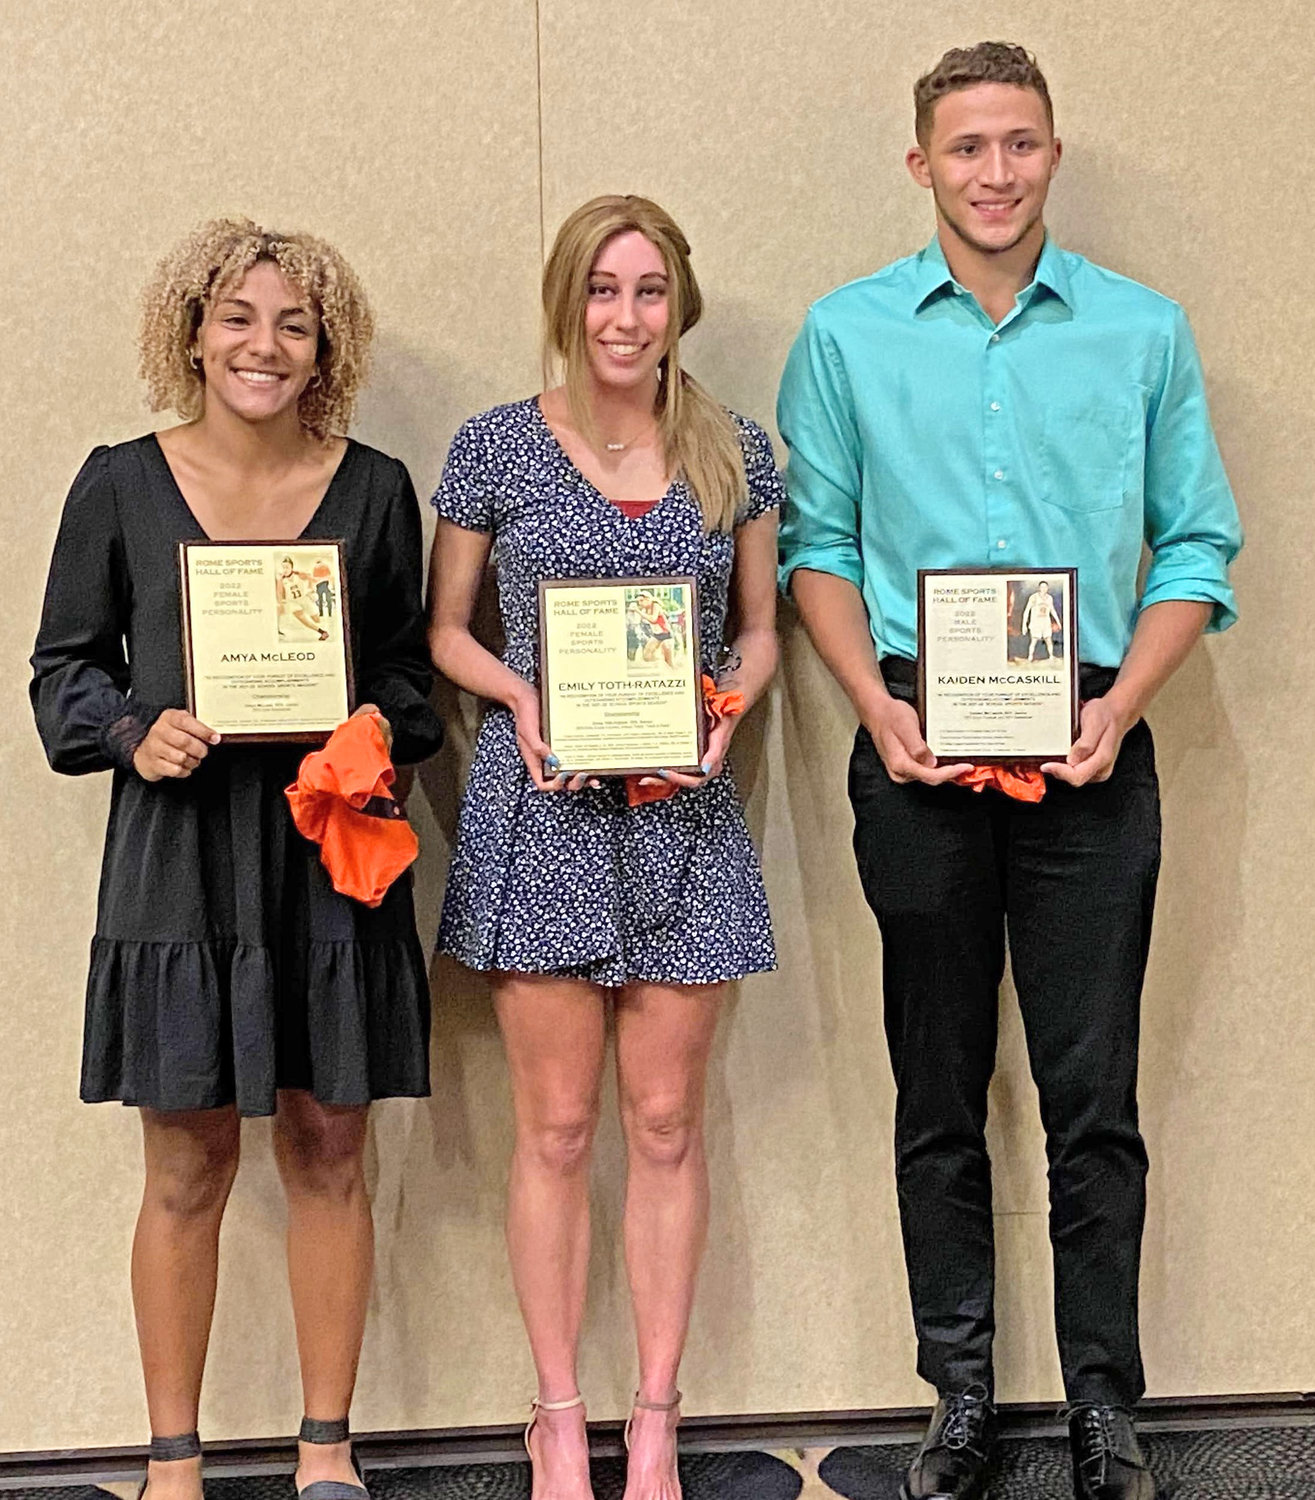 PERSONALITIES OF THE YEAR — The Rome Sports Hall of Fame Sport Personalities of the Year are, from left, Amya McLeod, Emily Toth-Ratazzi and Kaiden McCaskill.